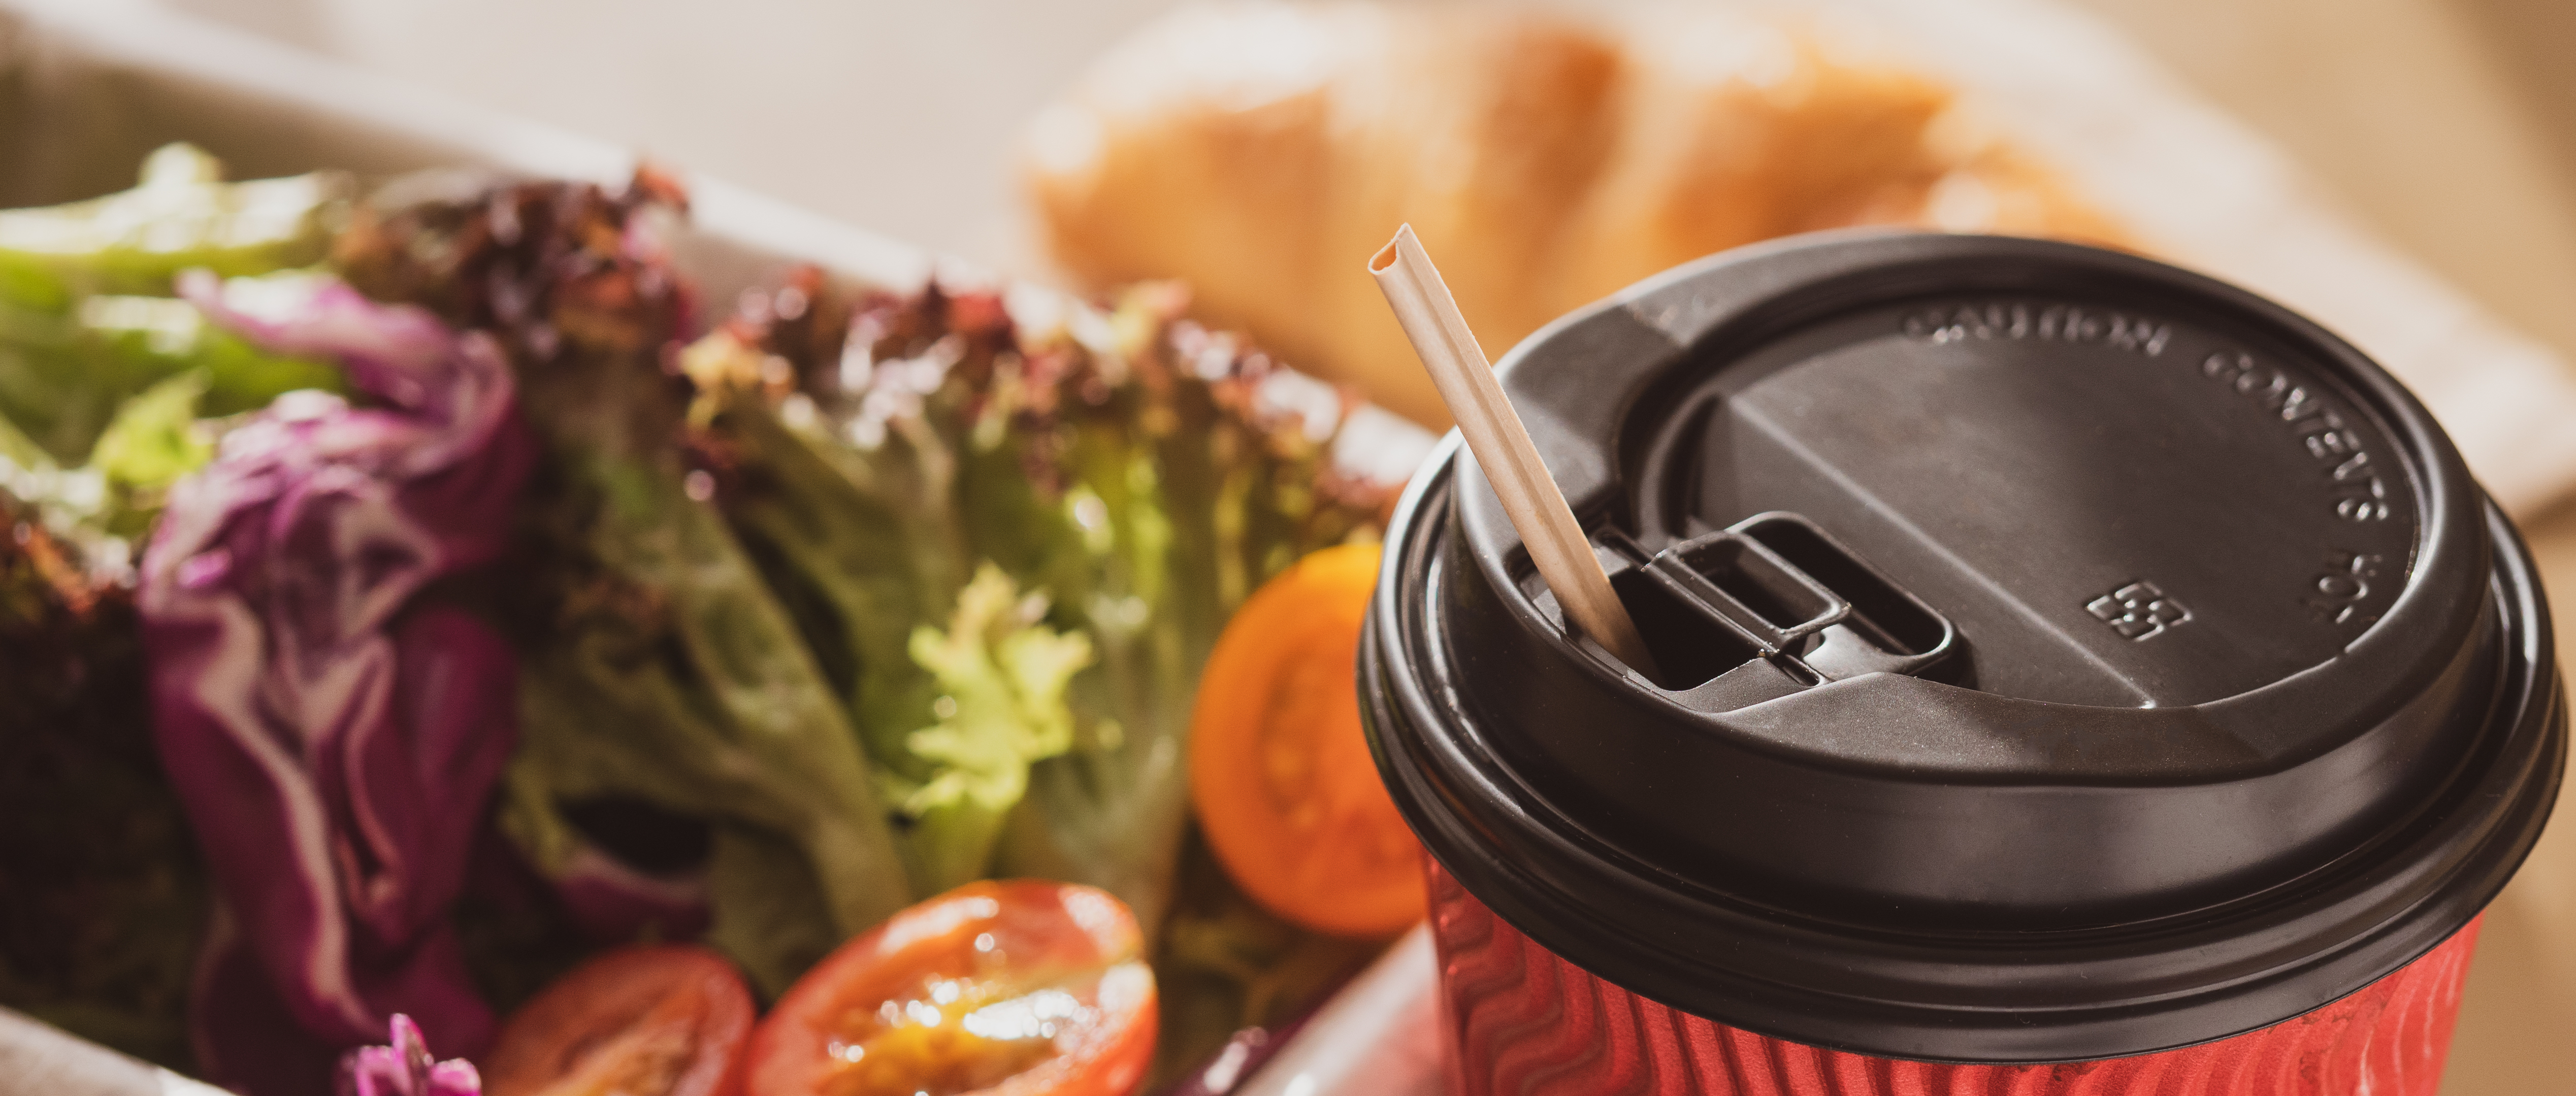 Coffee straw or stirrer or both? - Quora